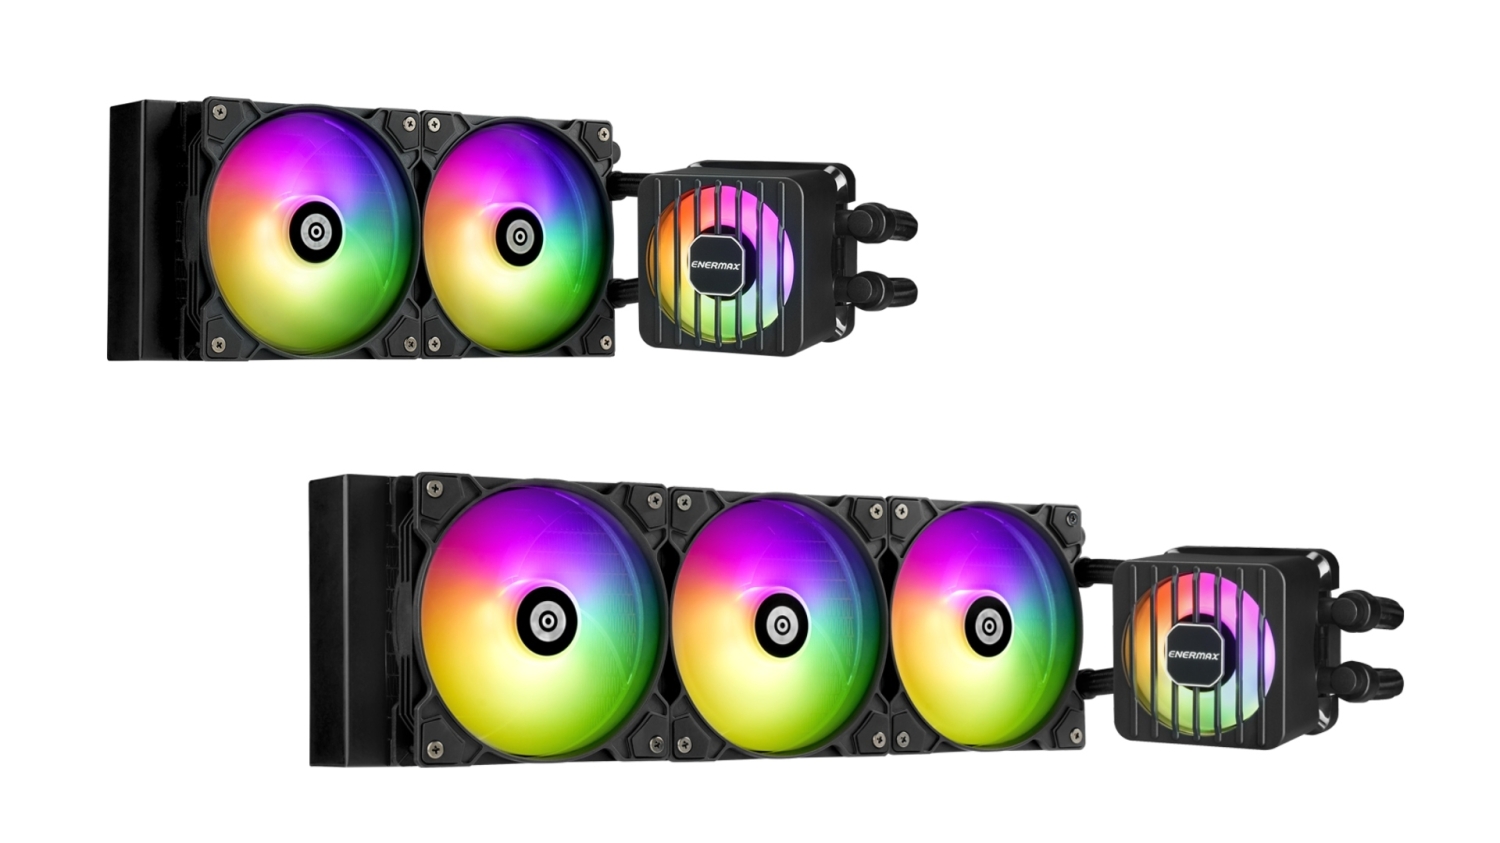 ENERMAX's new LIQMAXFLO AIO CPU cooler series is the company's first to  feature a VRM fan